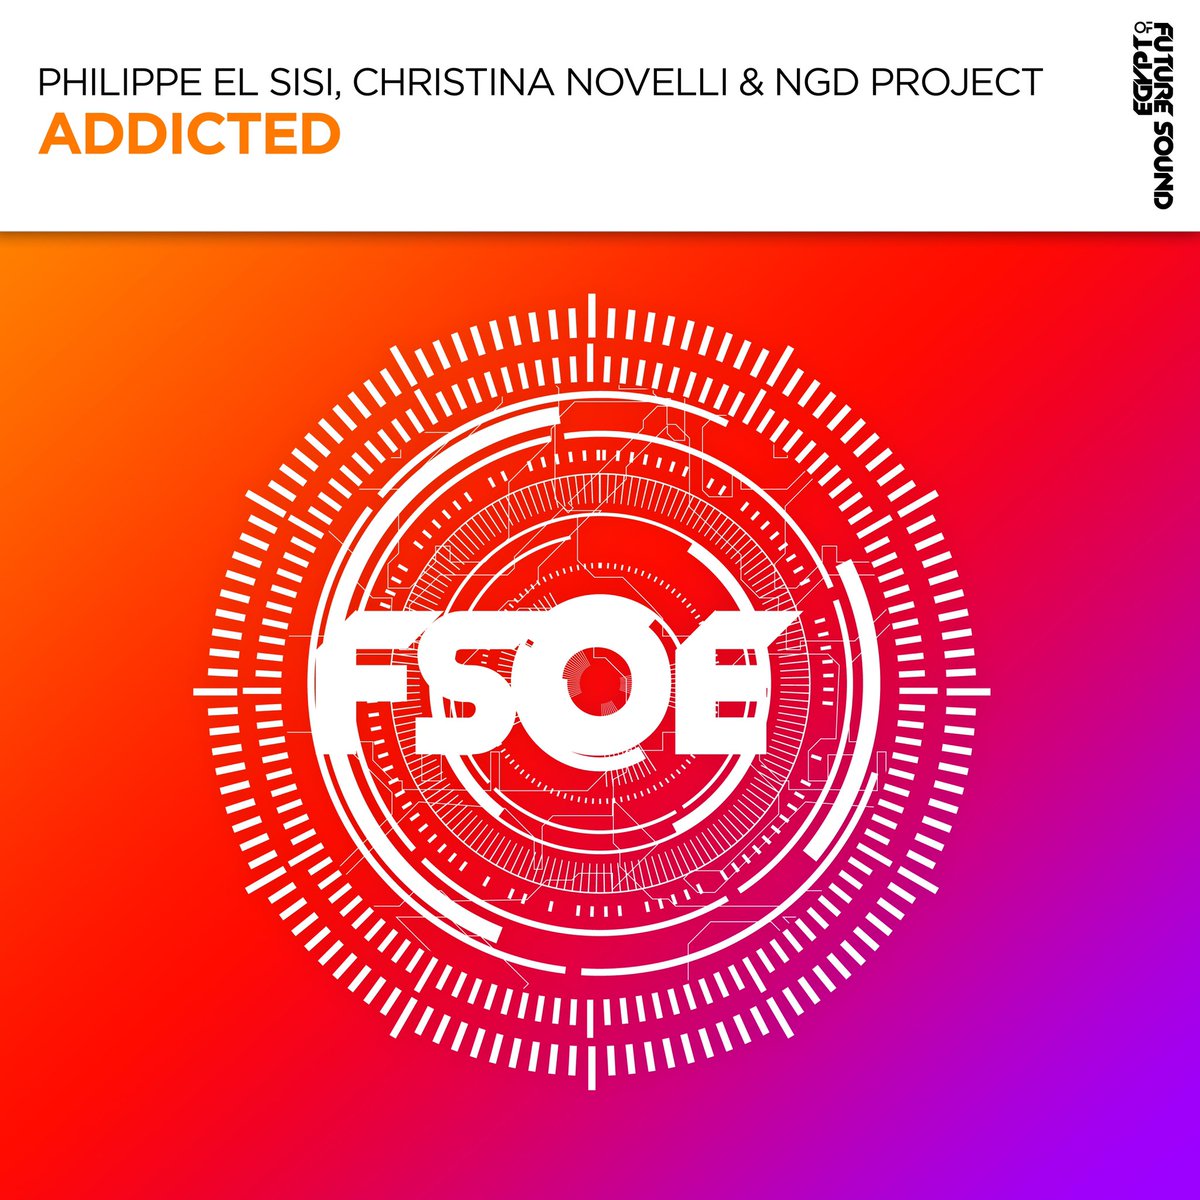 ADDICTED w/ @Philippeelsisi and Christina Novelli drops next Friday on @alyandfila label @FsoeRecordings 🔥 Pre-Save link in our bio! 🚀